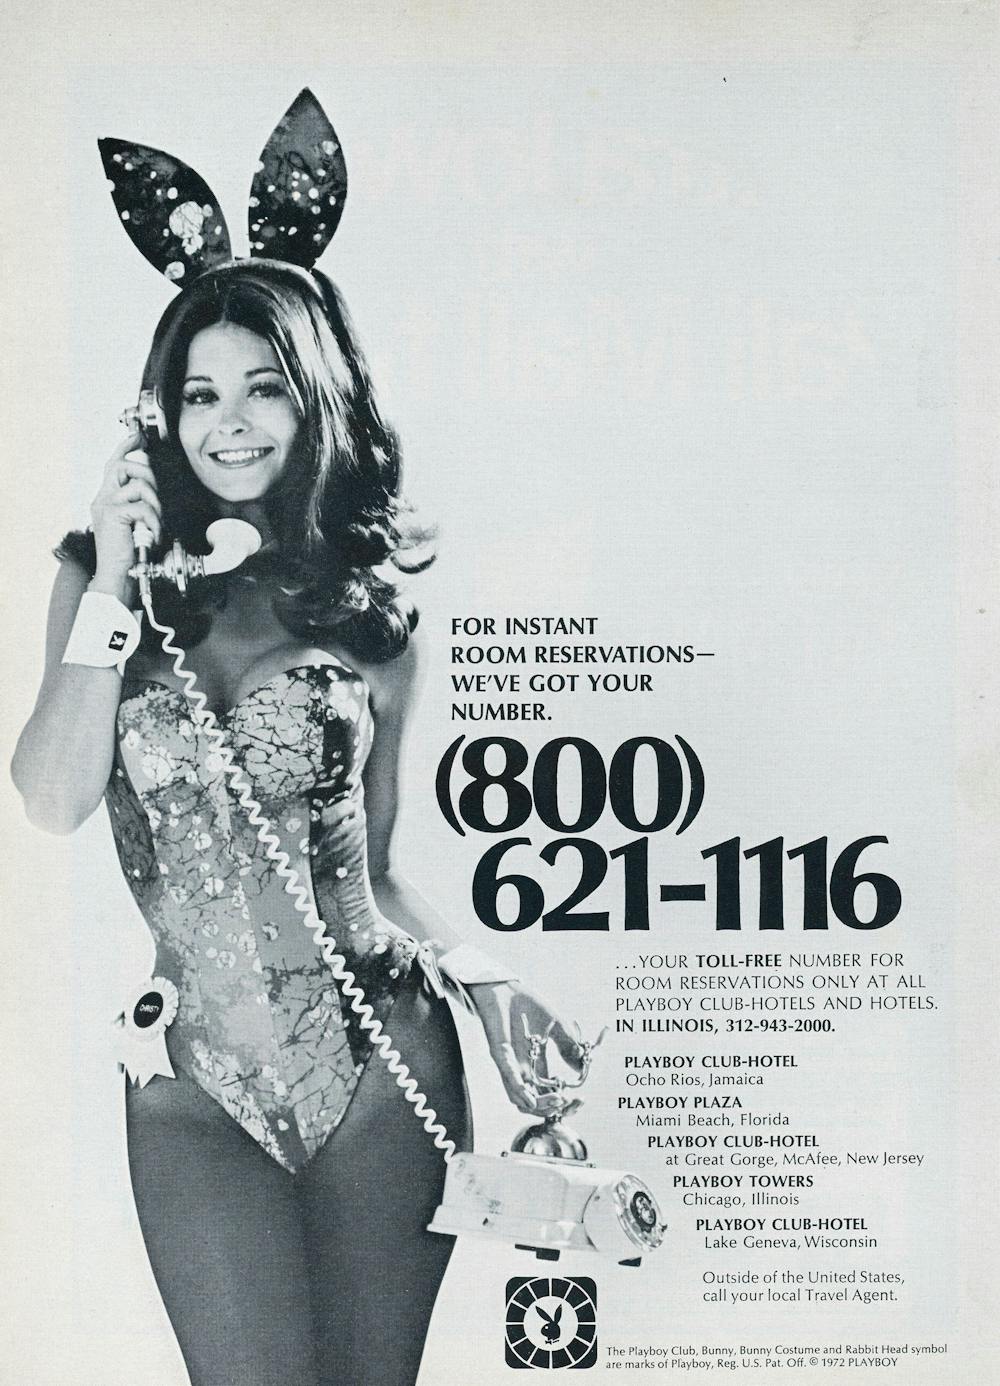 How the Playboy bunny suit went from uniform to Halloween costume